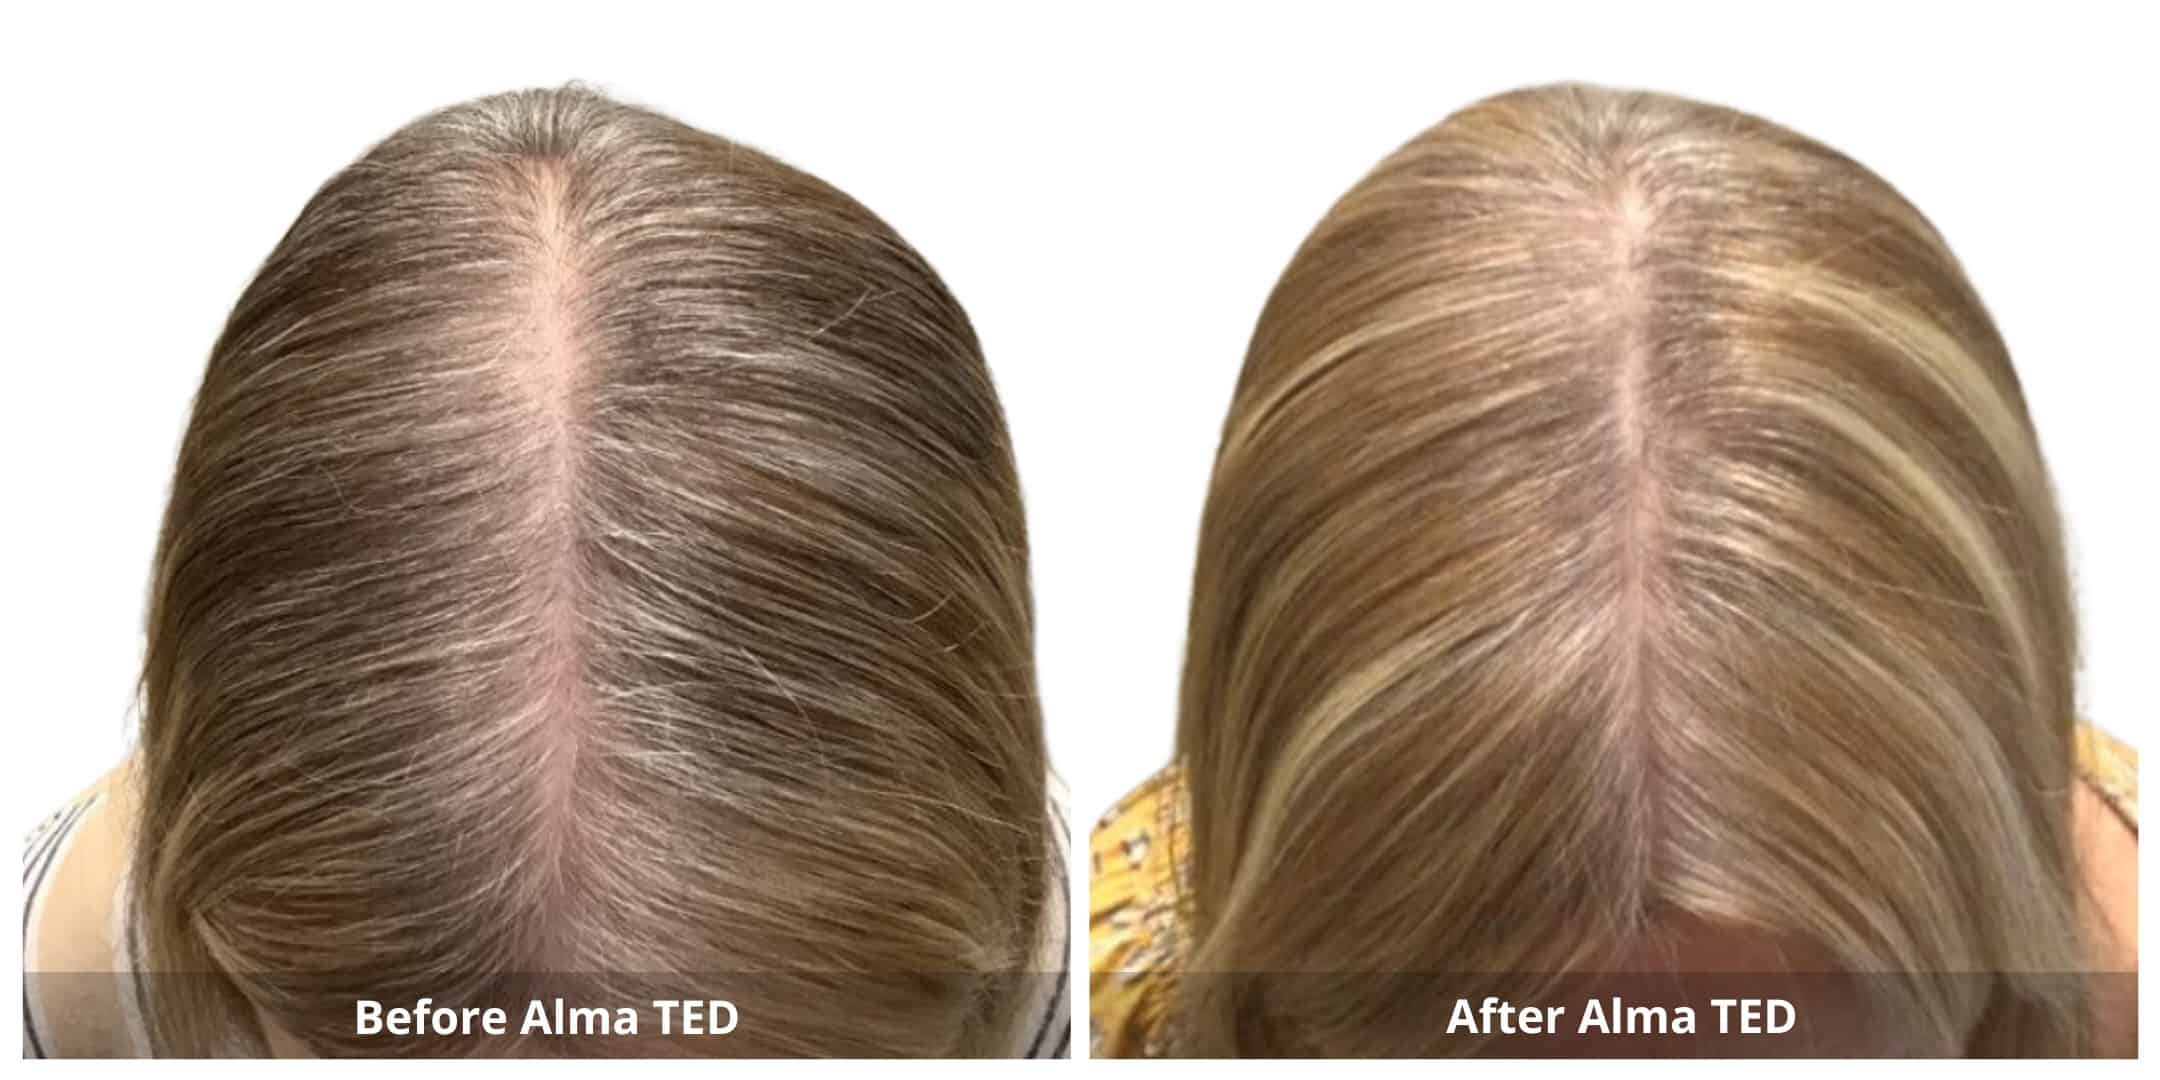 before and after the treatment of alma ted